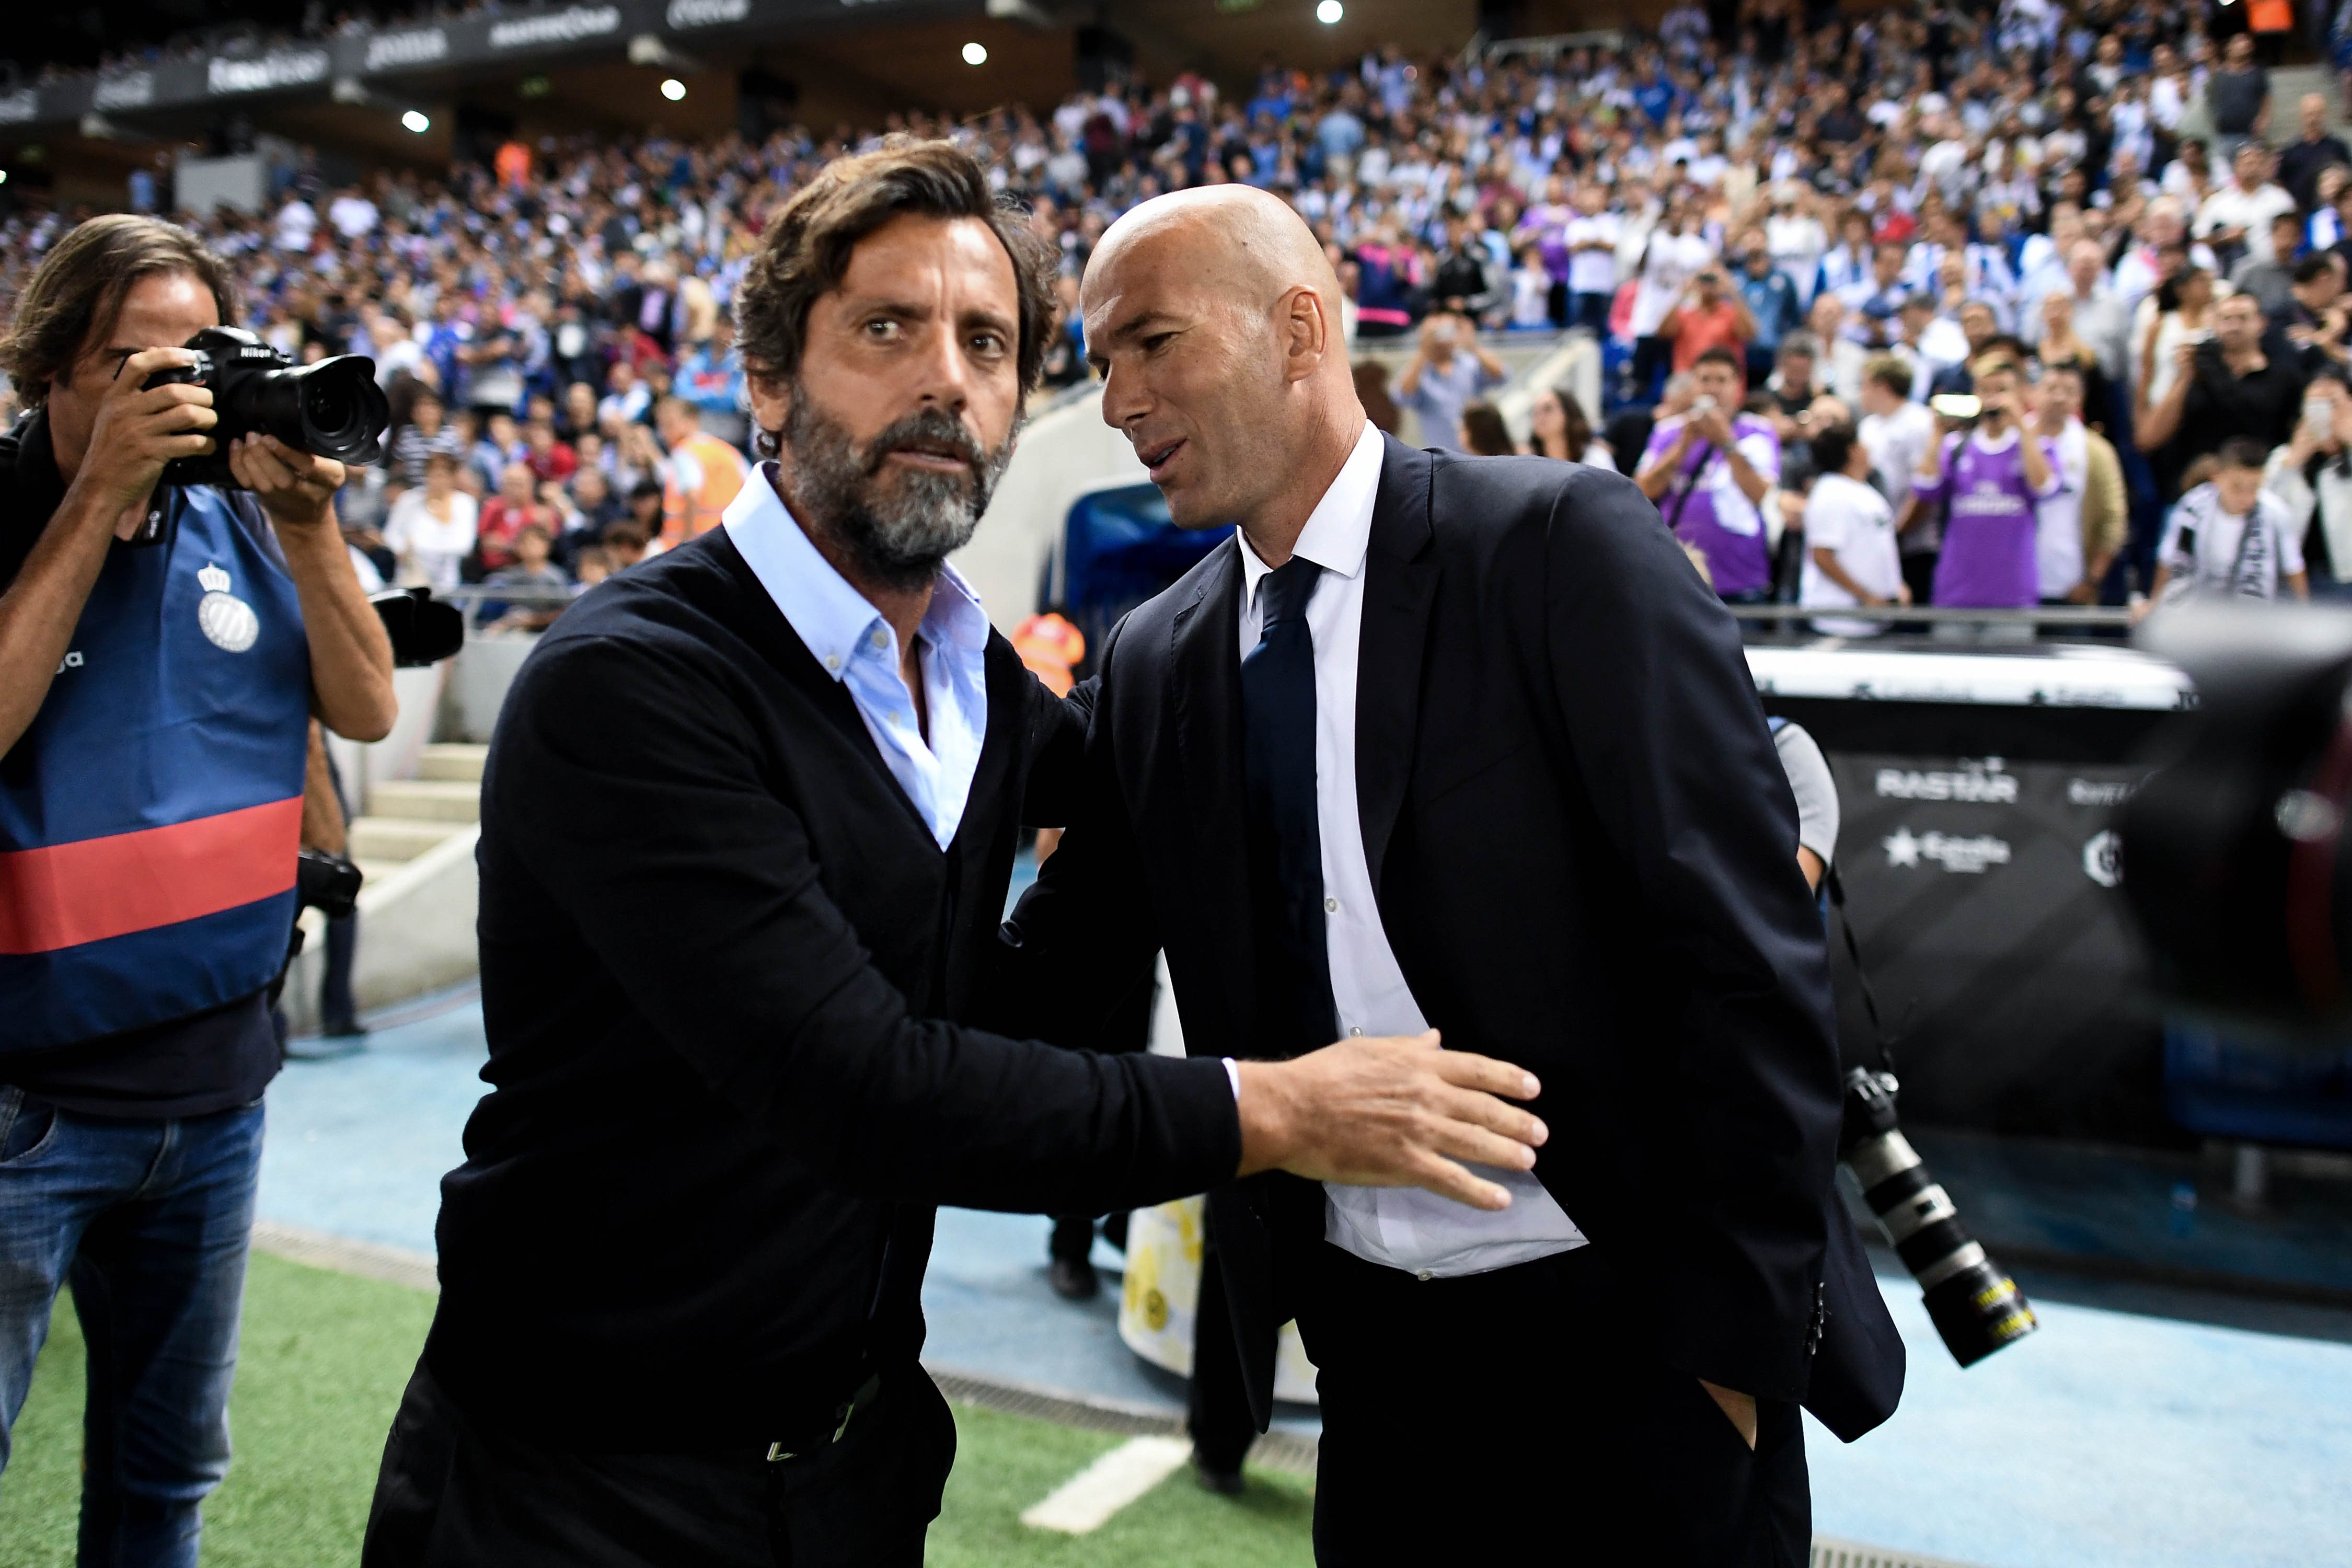 BARCELONA, SPAIN - SEPTEMBER 18: Head coach Quique Sanchez Flores (L) of RCD Espanyol and Head coach Zinedine Zidane of Real Madrid CF shake hands prior to the La Liga match between RCD Espanyol and Real Madrid CF at the RCDE stadium on September 18, 2016 in Barcelona, Spain.  (Photo by David Ramos/Getty Images)